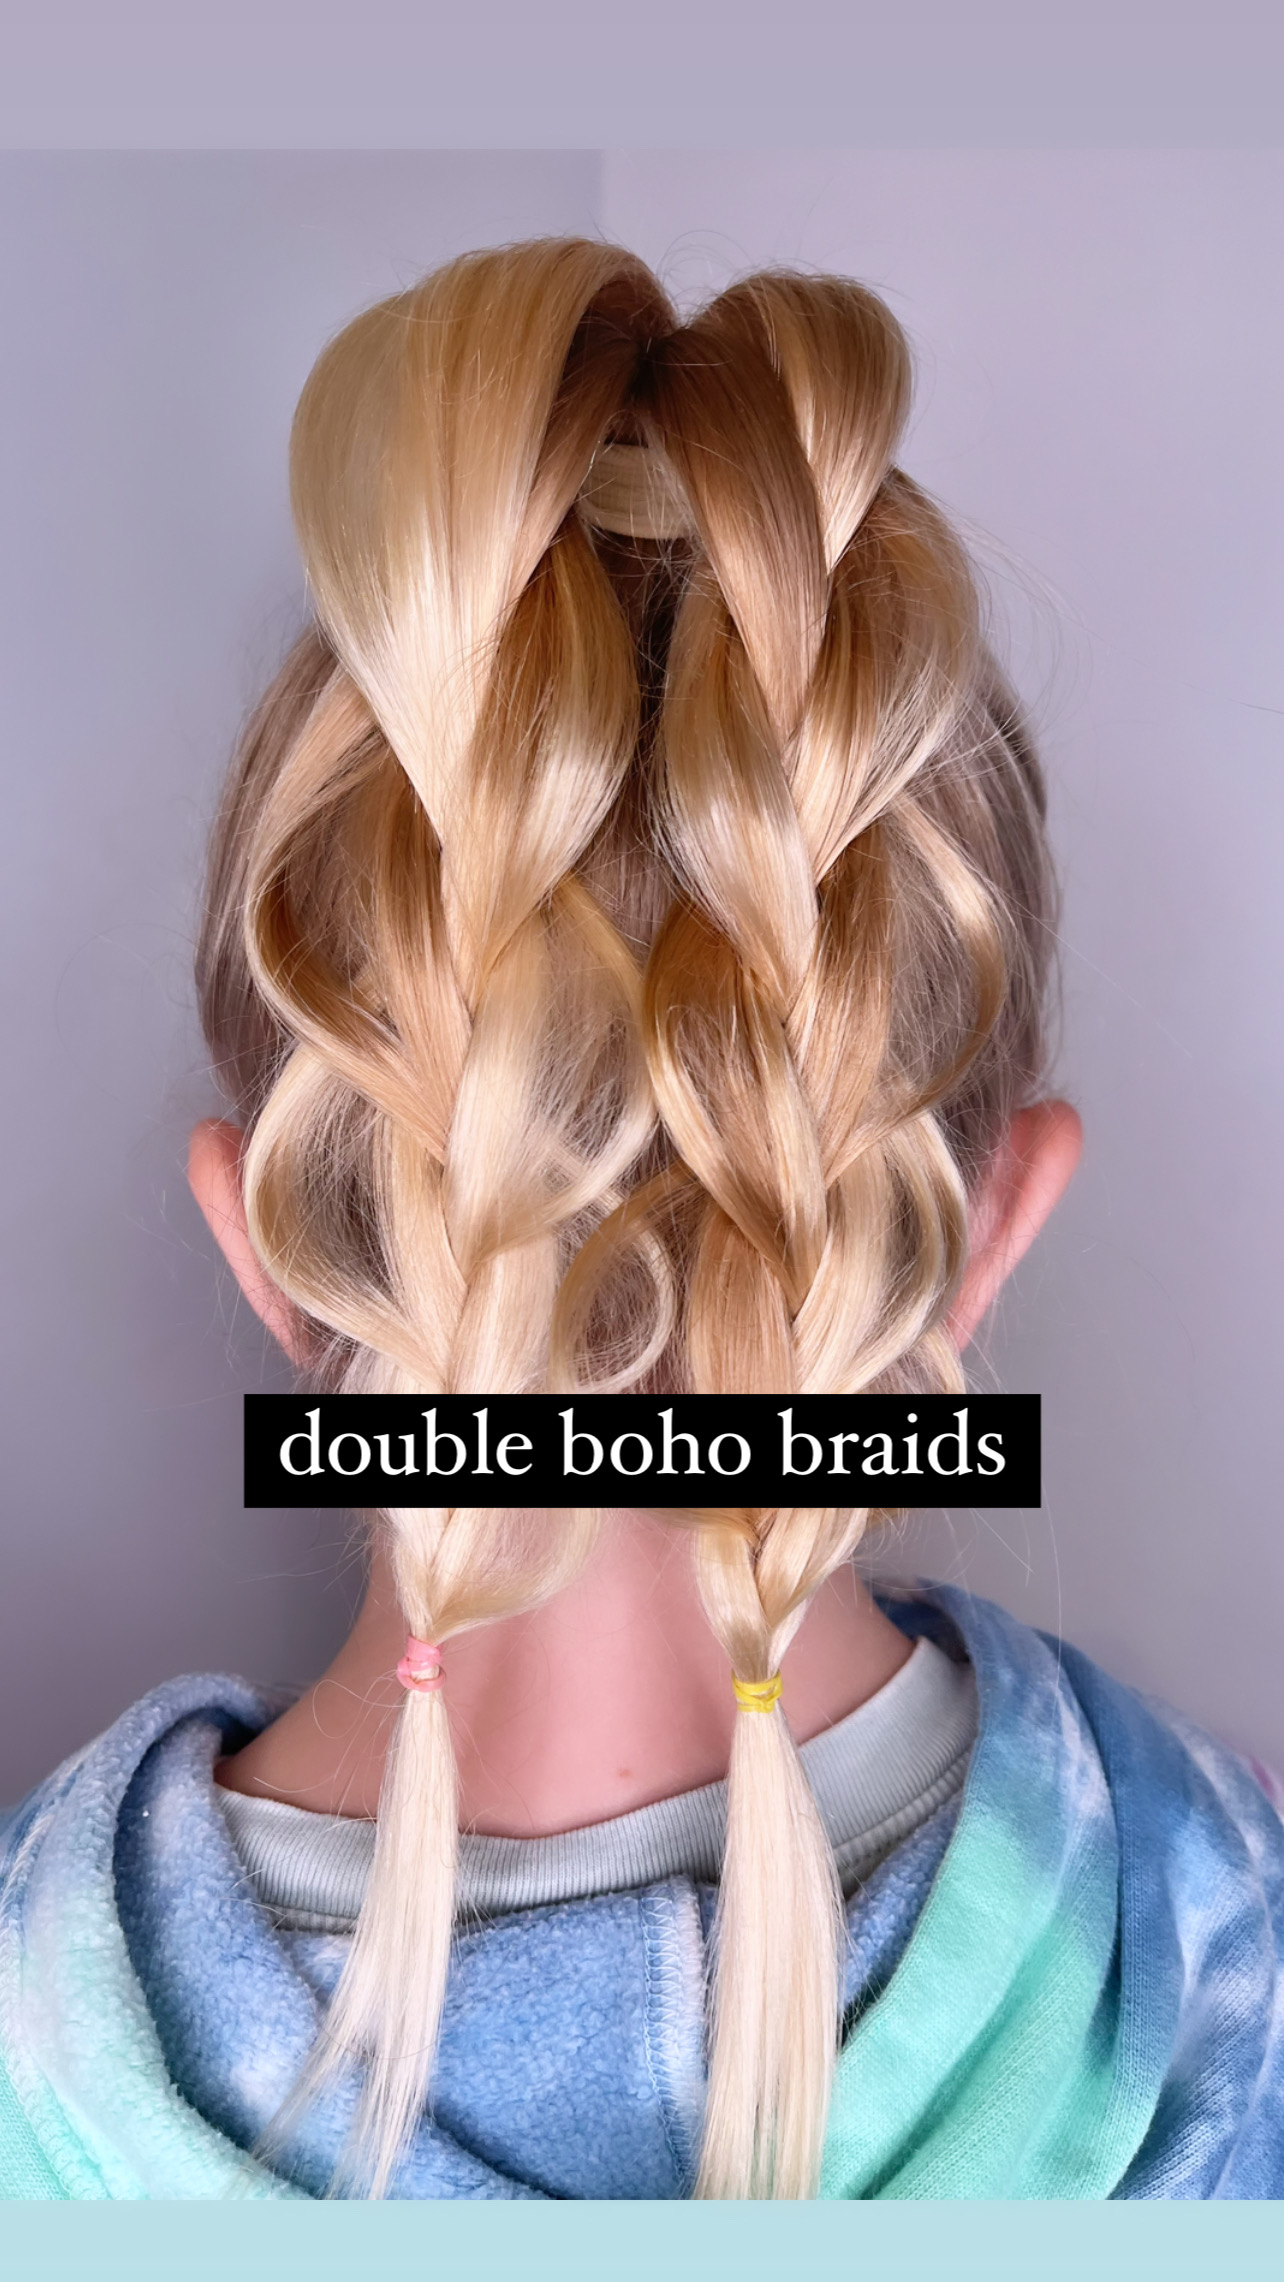 Only Have Two Minutes 7 Quick and Easy Hairstyles Every Girl Will Love ...